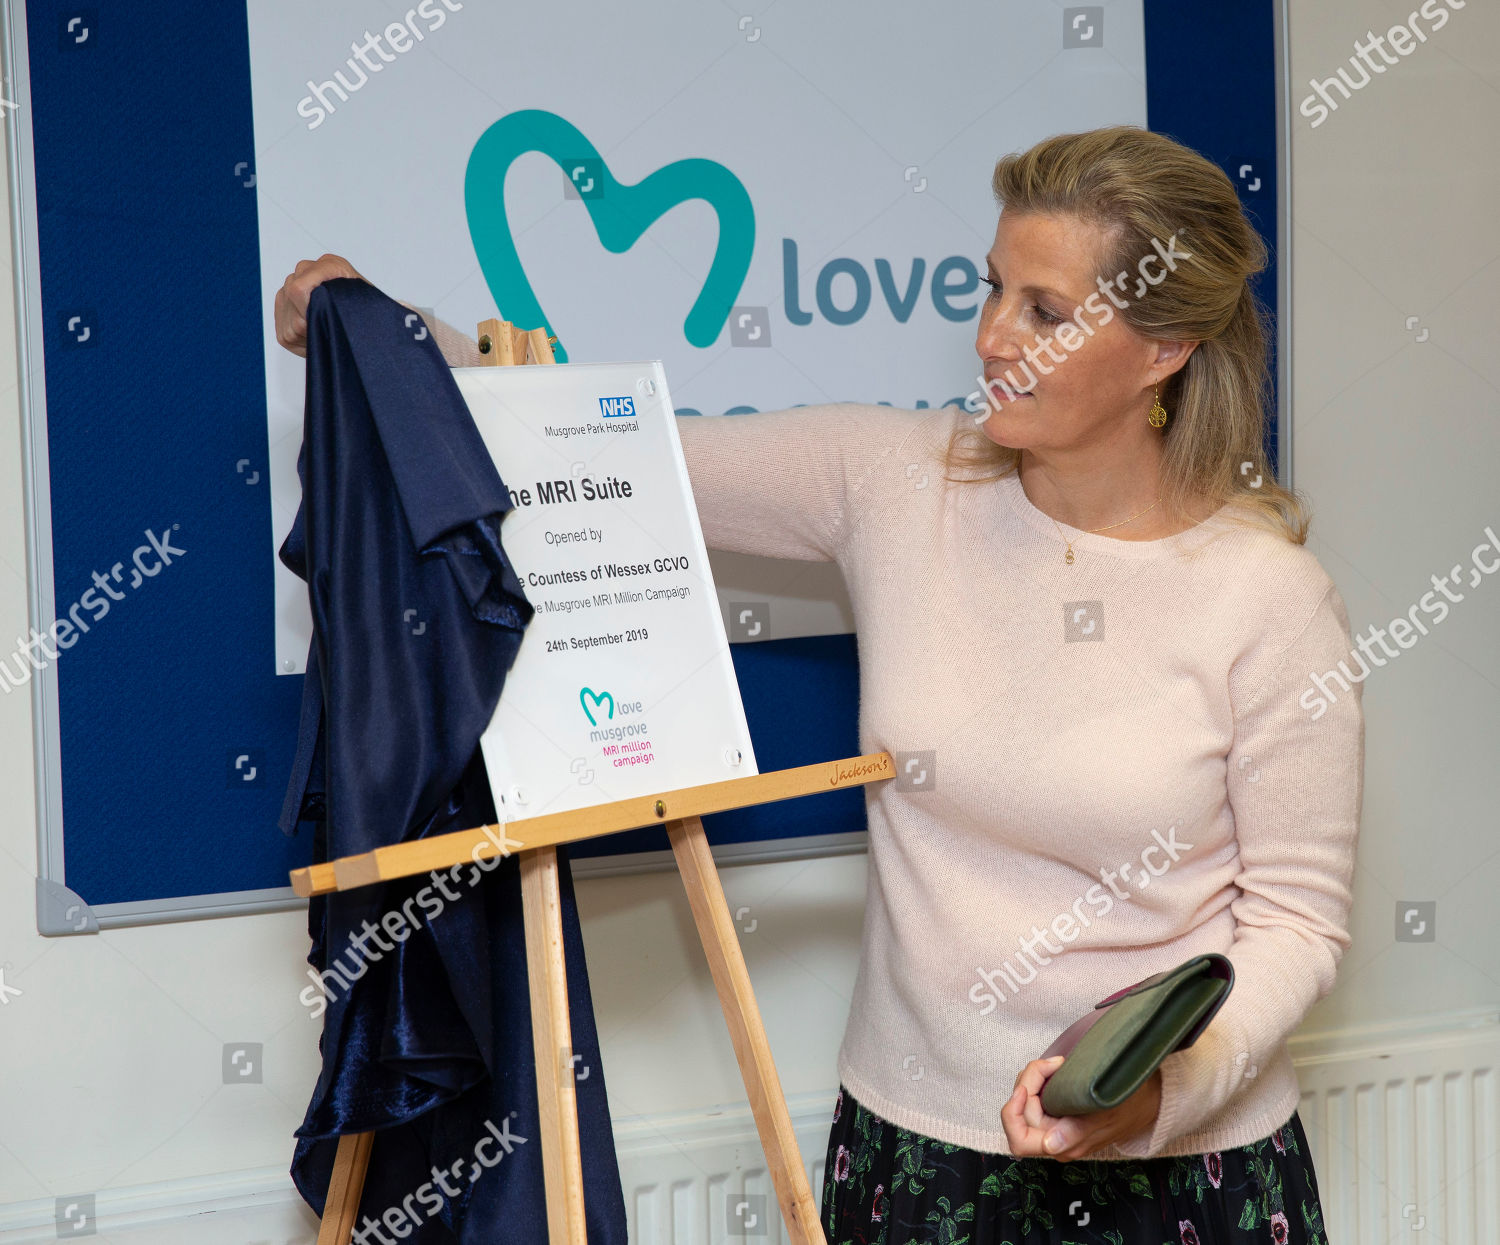 sophie-countess-of-wessex-visit-to-musgrove-park-hospital-taunton-somerset-uk-shutterstock-editorial-10422506w.jpg